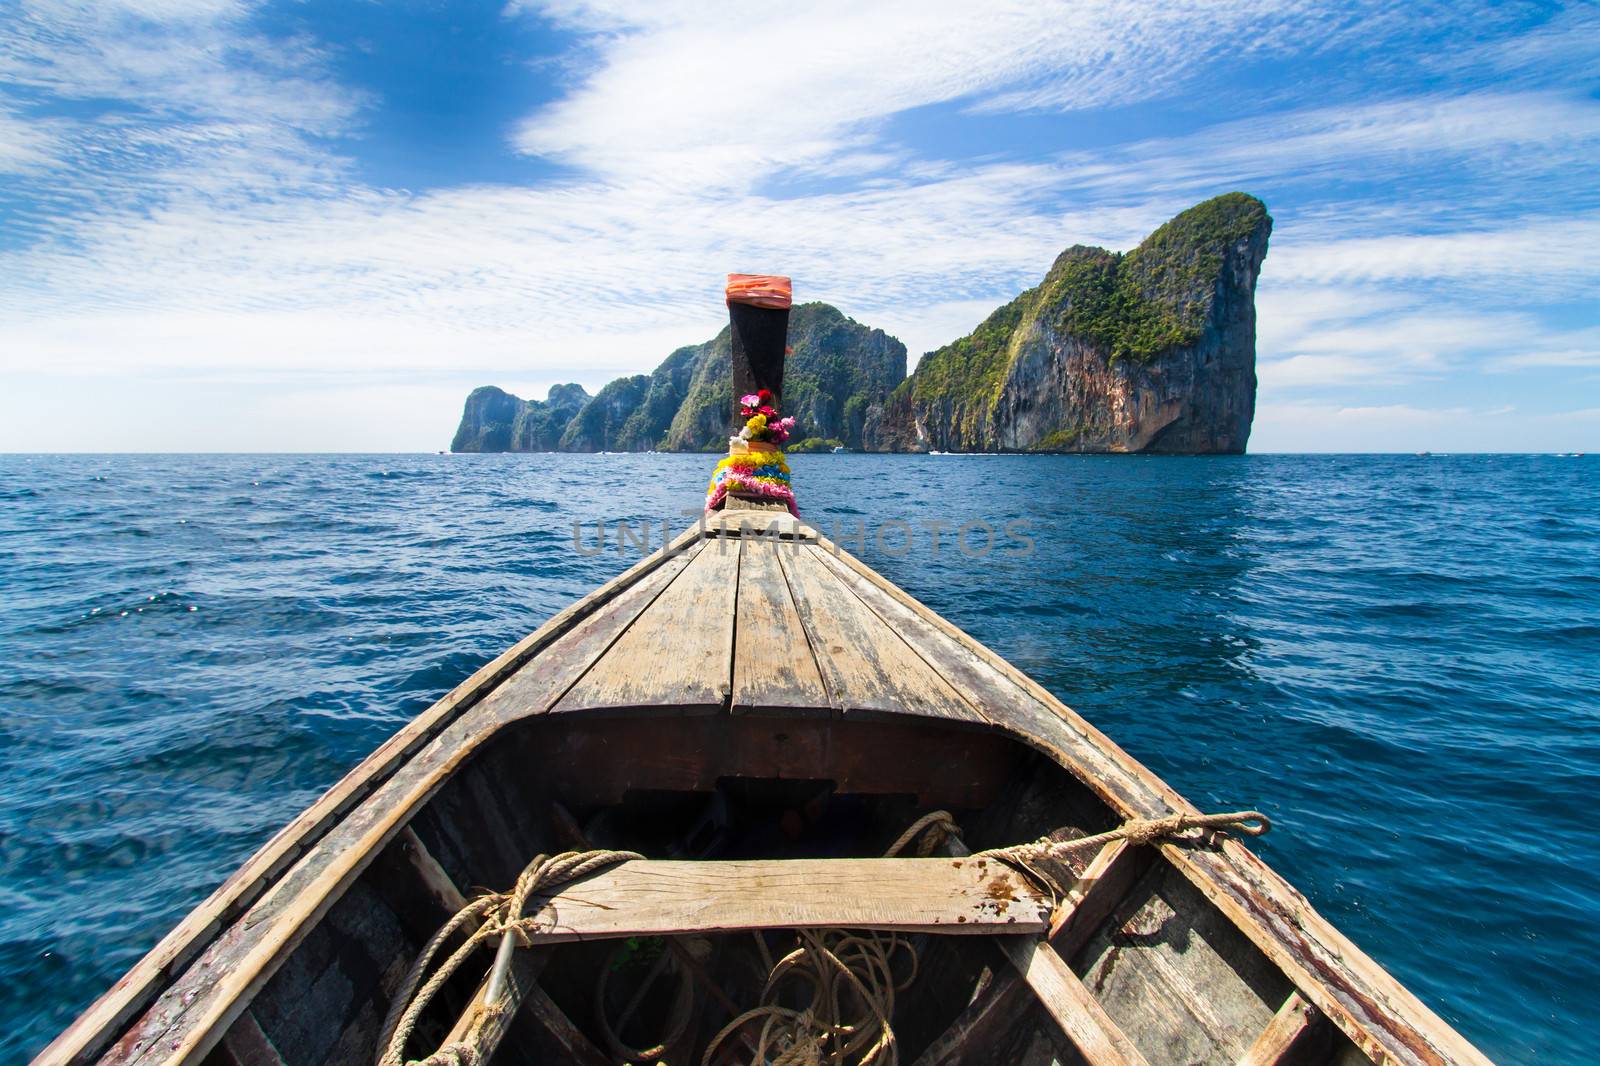 Wooden boat near Phi Phi island, Thailand. by kasto